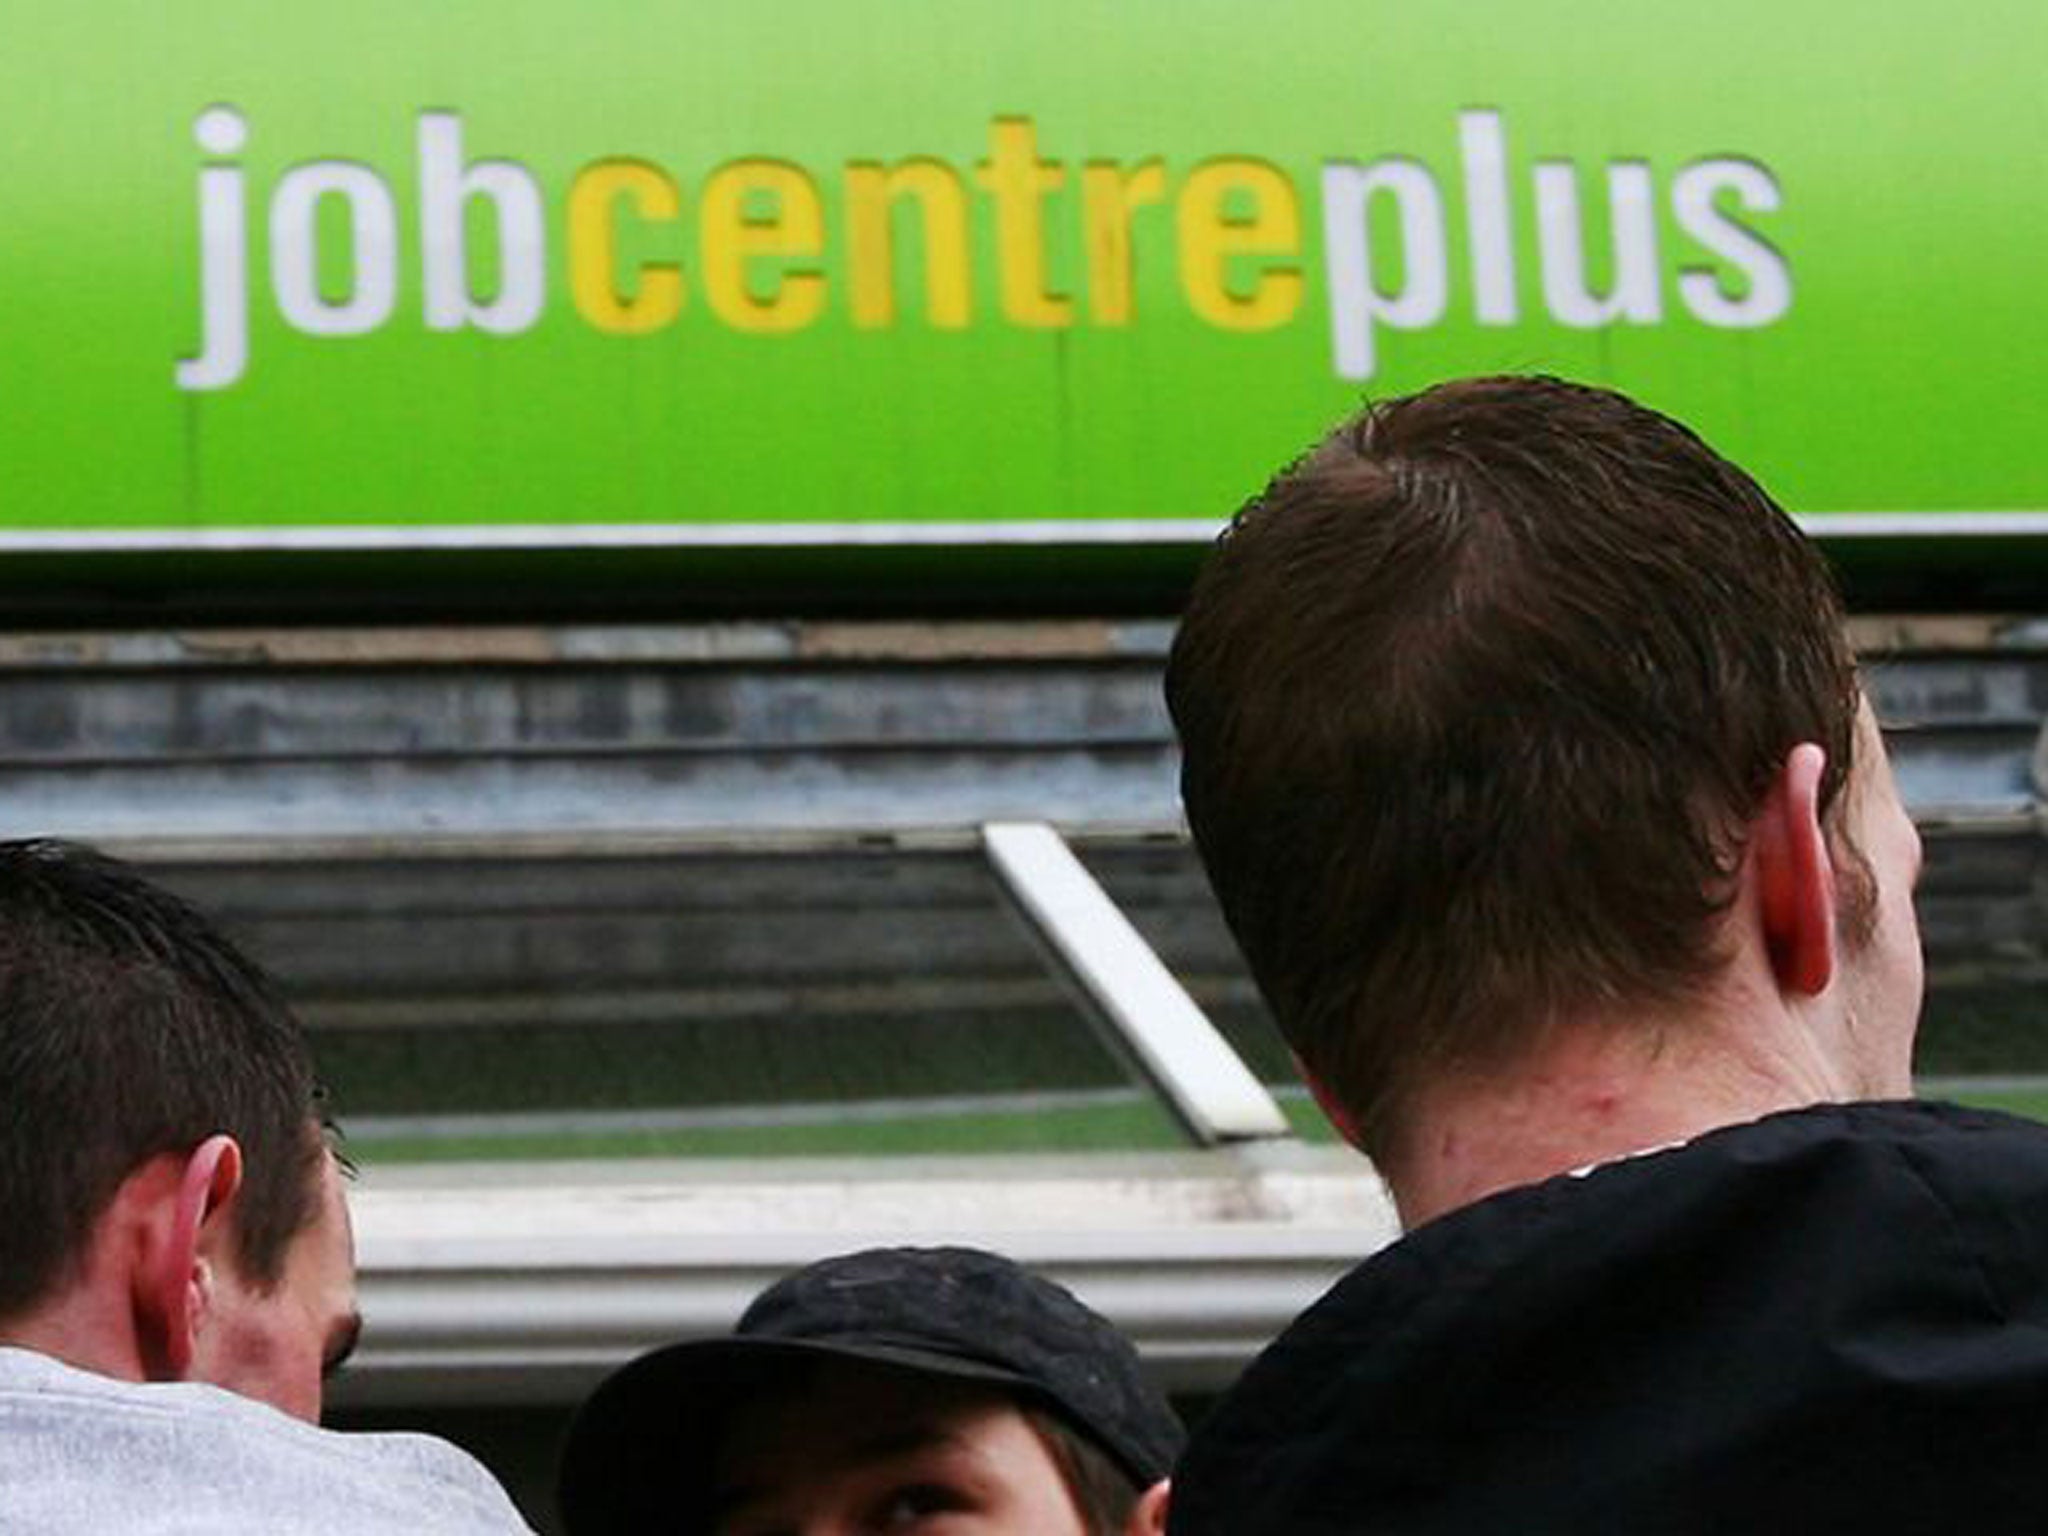 A jobseeker refusing work without a good reason could lose benefits for 13 weeks for a first offence, 26 weeks for a second and three years for a third one